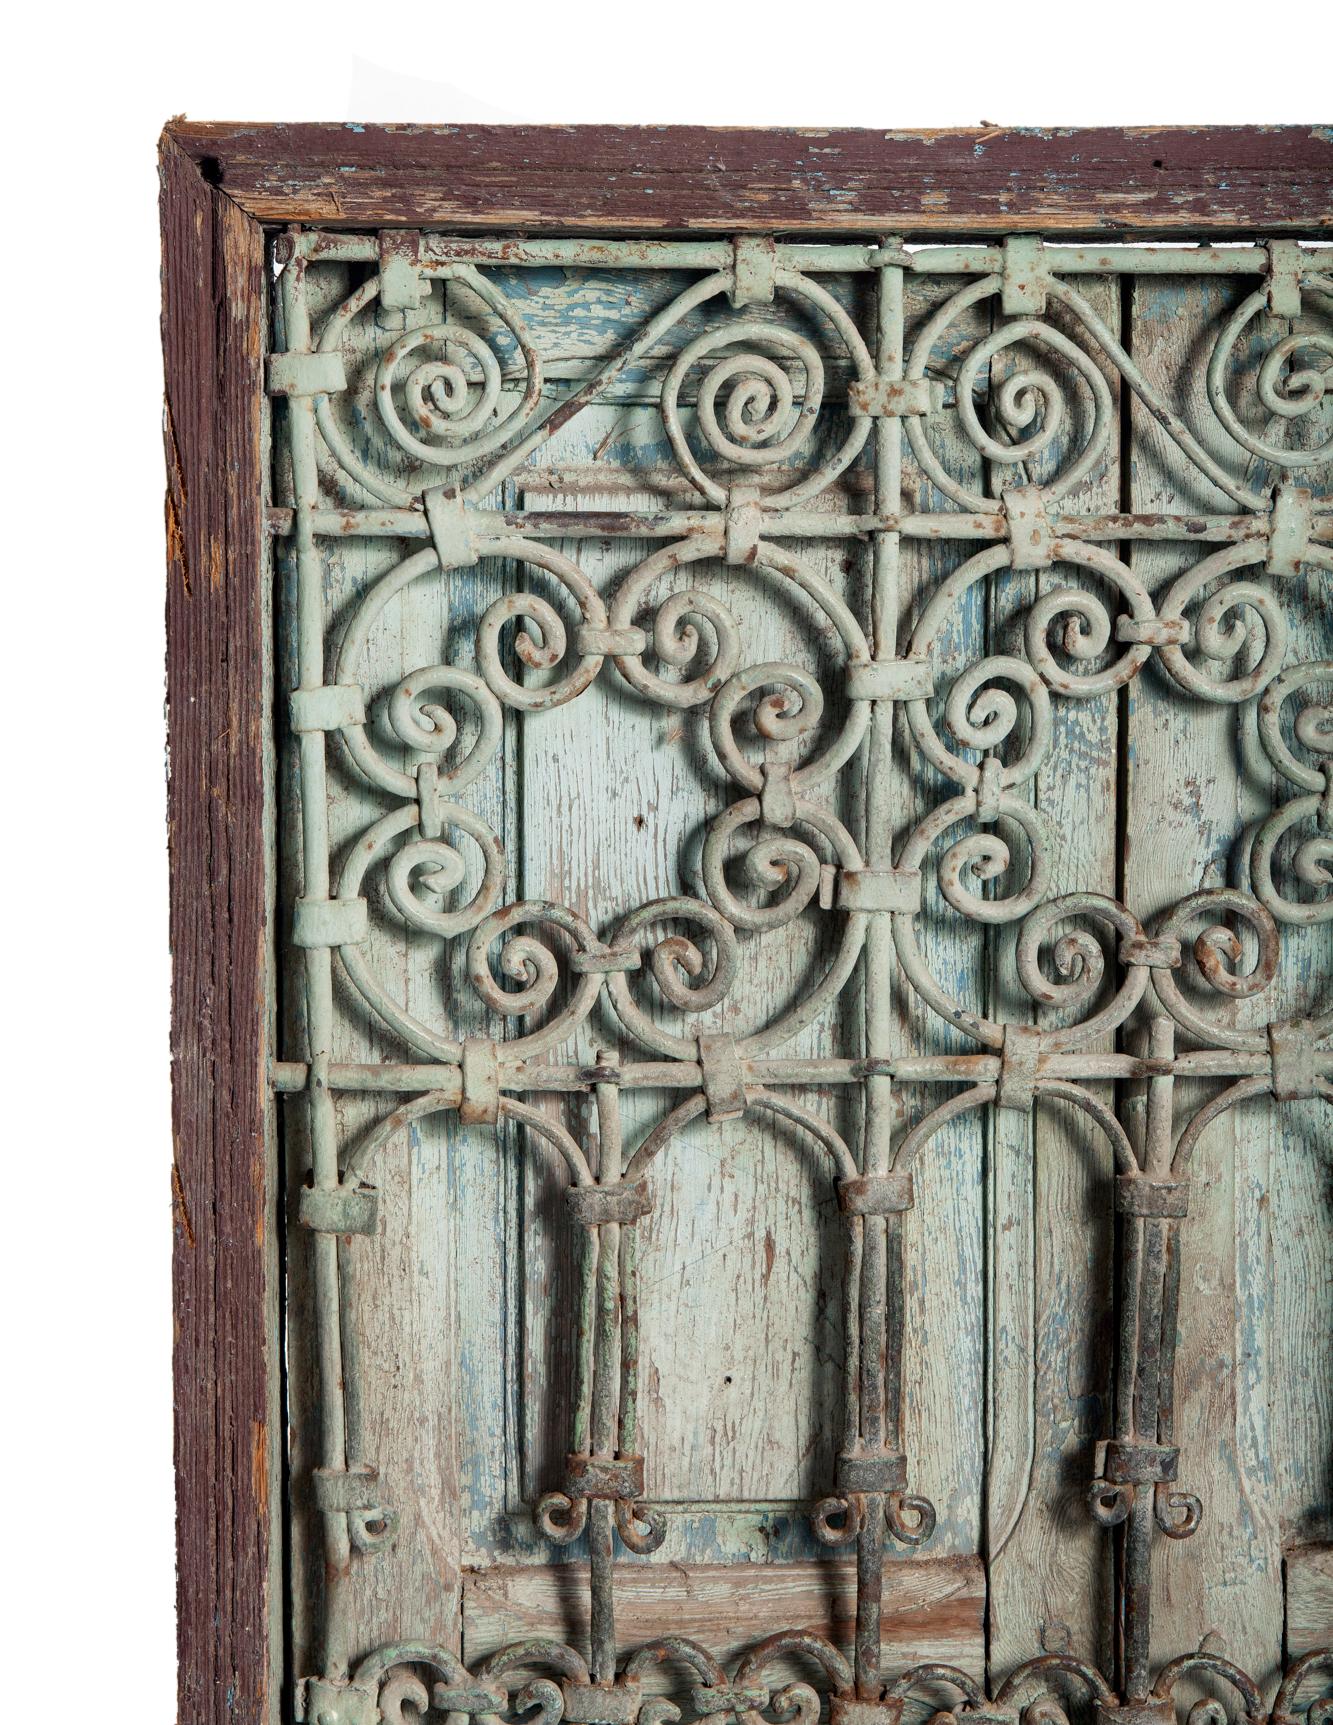 Antique & weathered, an early 19thC Moroccan window with the original shutters. Pale green weathered patina on the hand forged iron made in the early 1800's, the window still maintains old paint in the original green.
A beautiful example of handmade